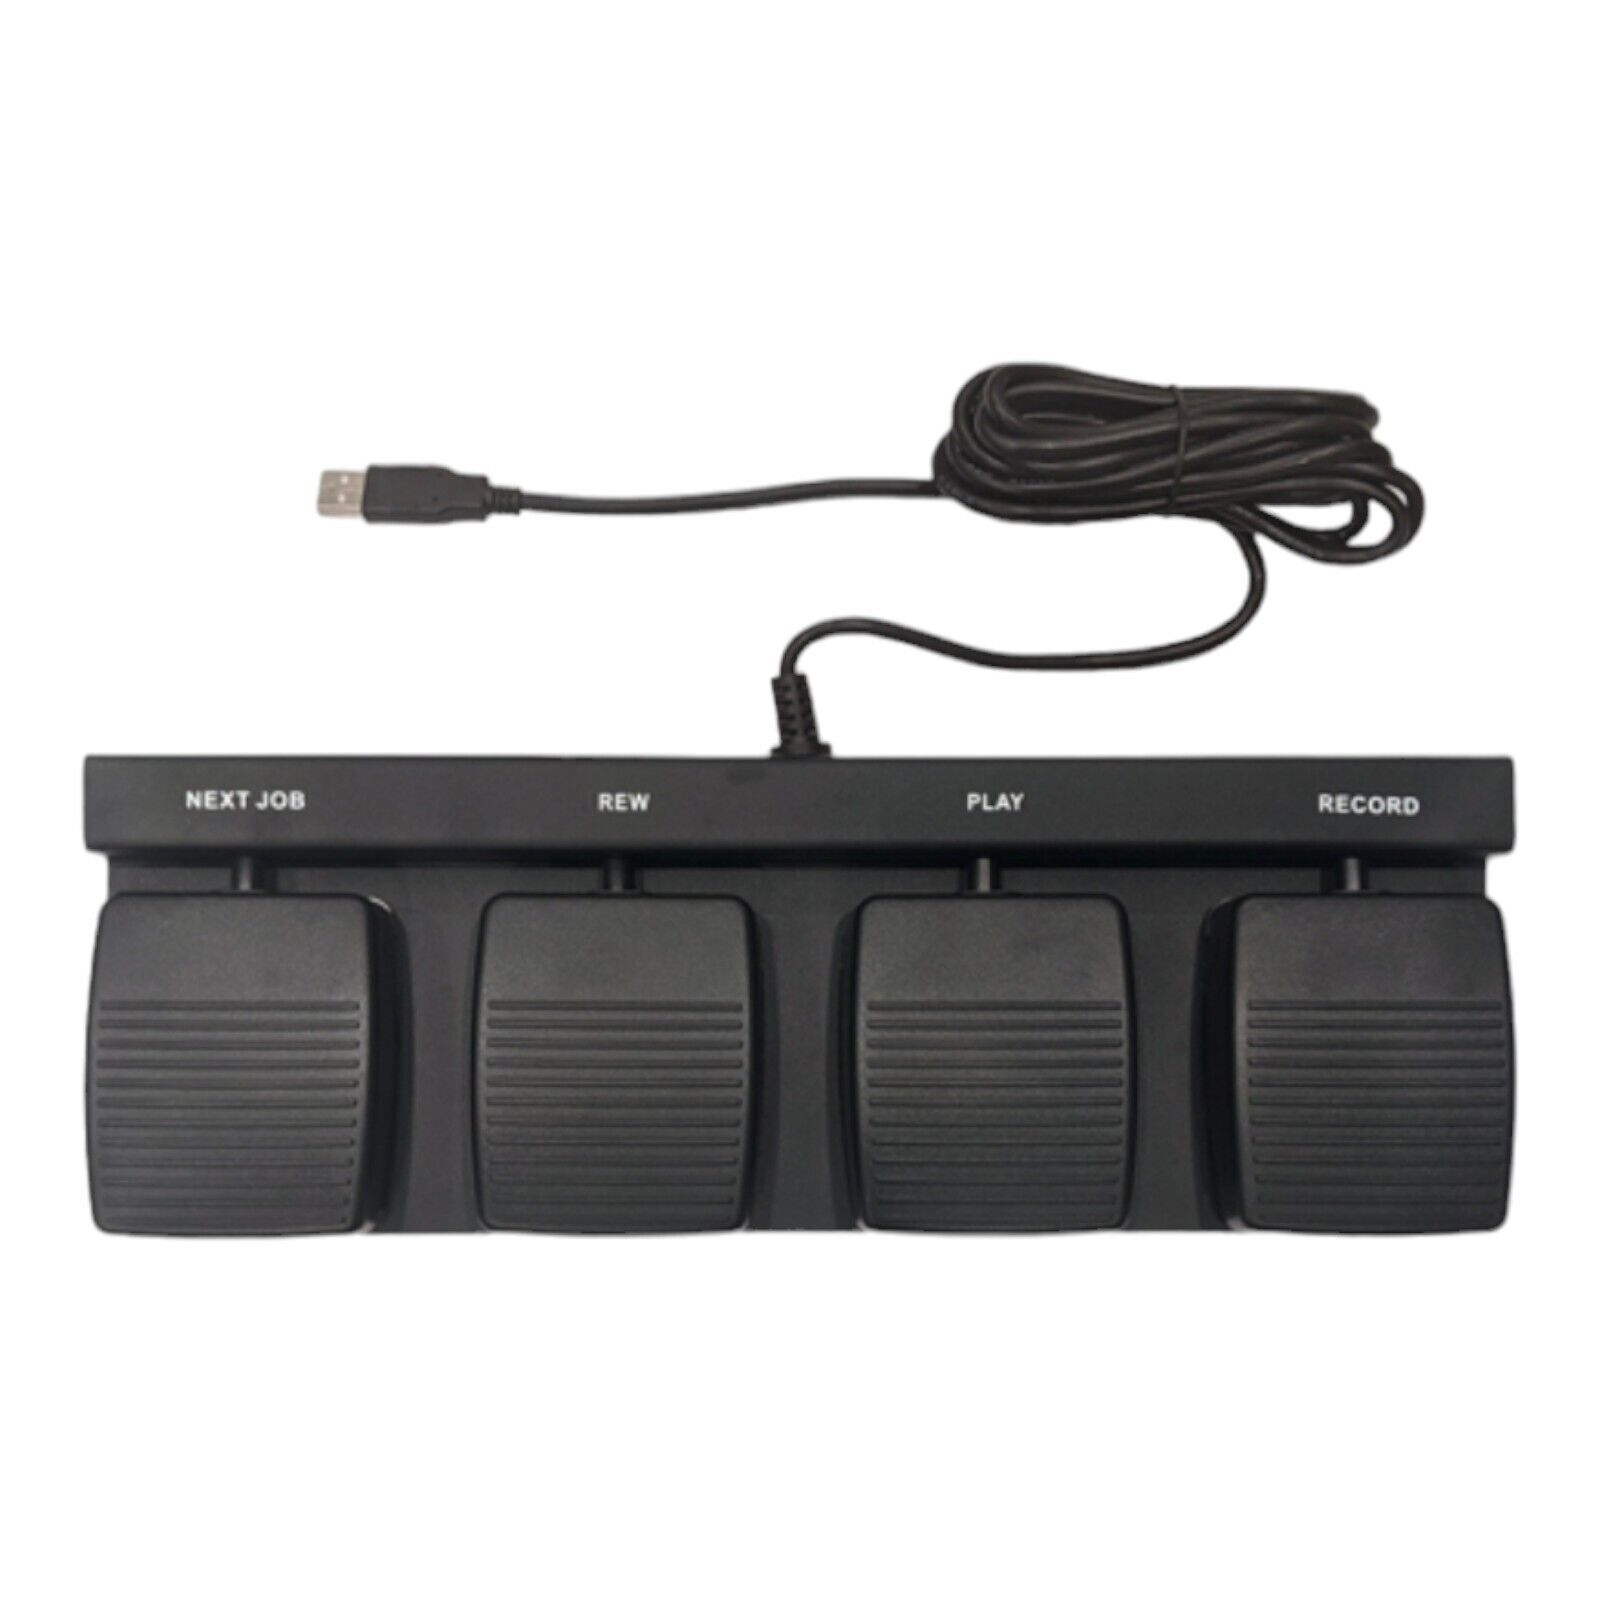 DAC 4-Function Foot Pedal for PC Hands-Free Dictation FP-110USB/4 FP-110-USB/4 